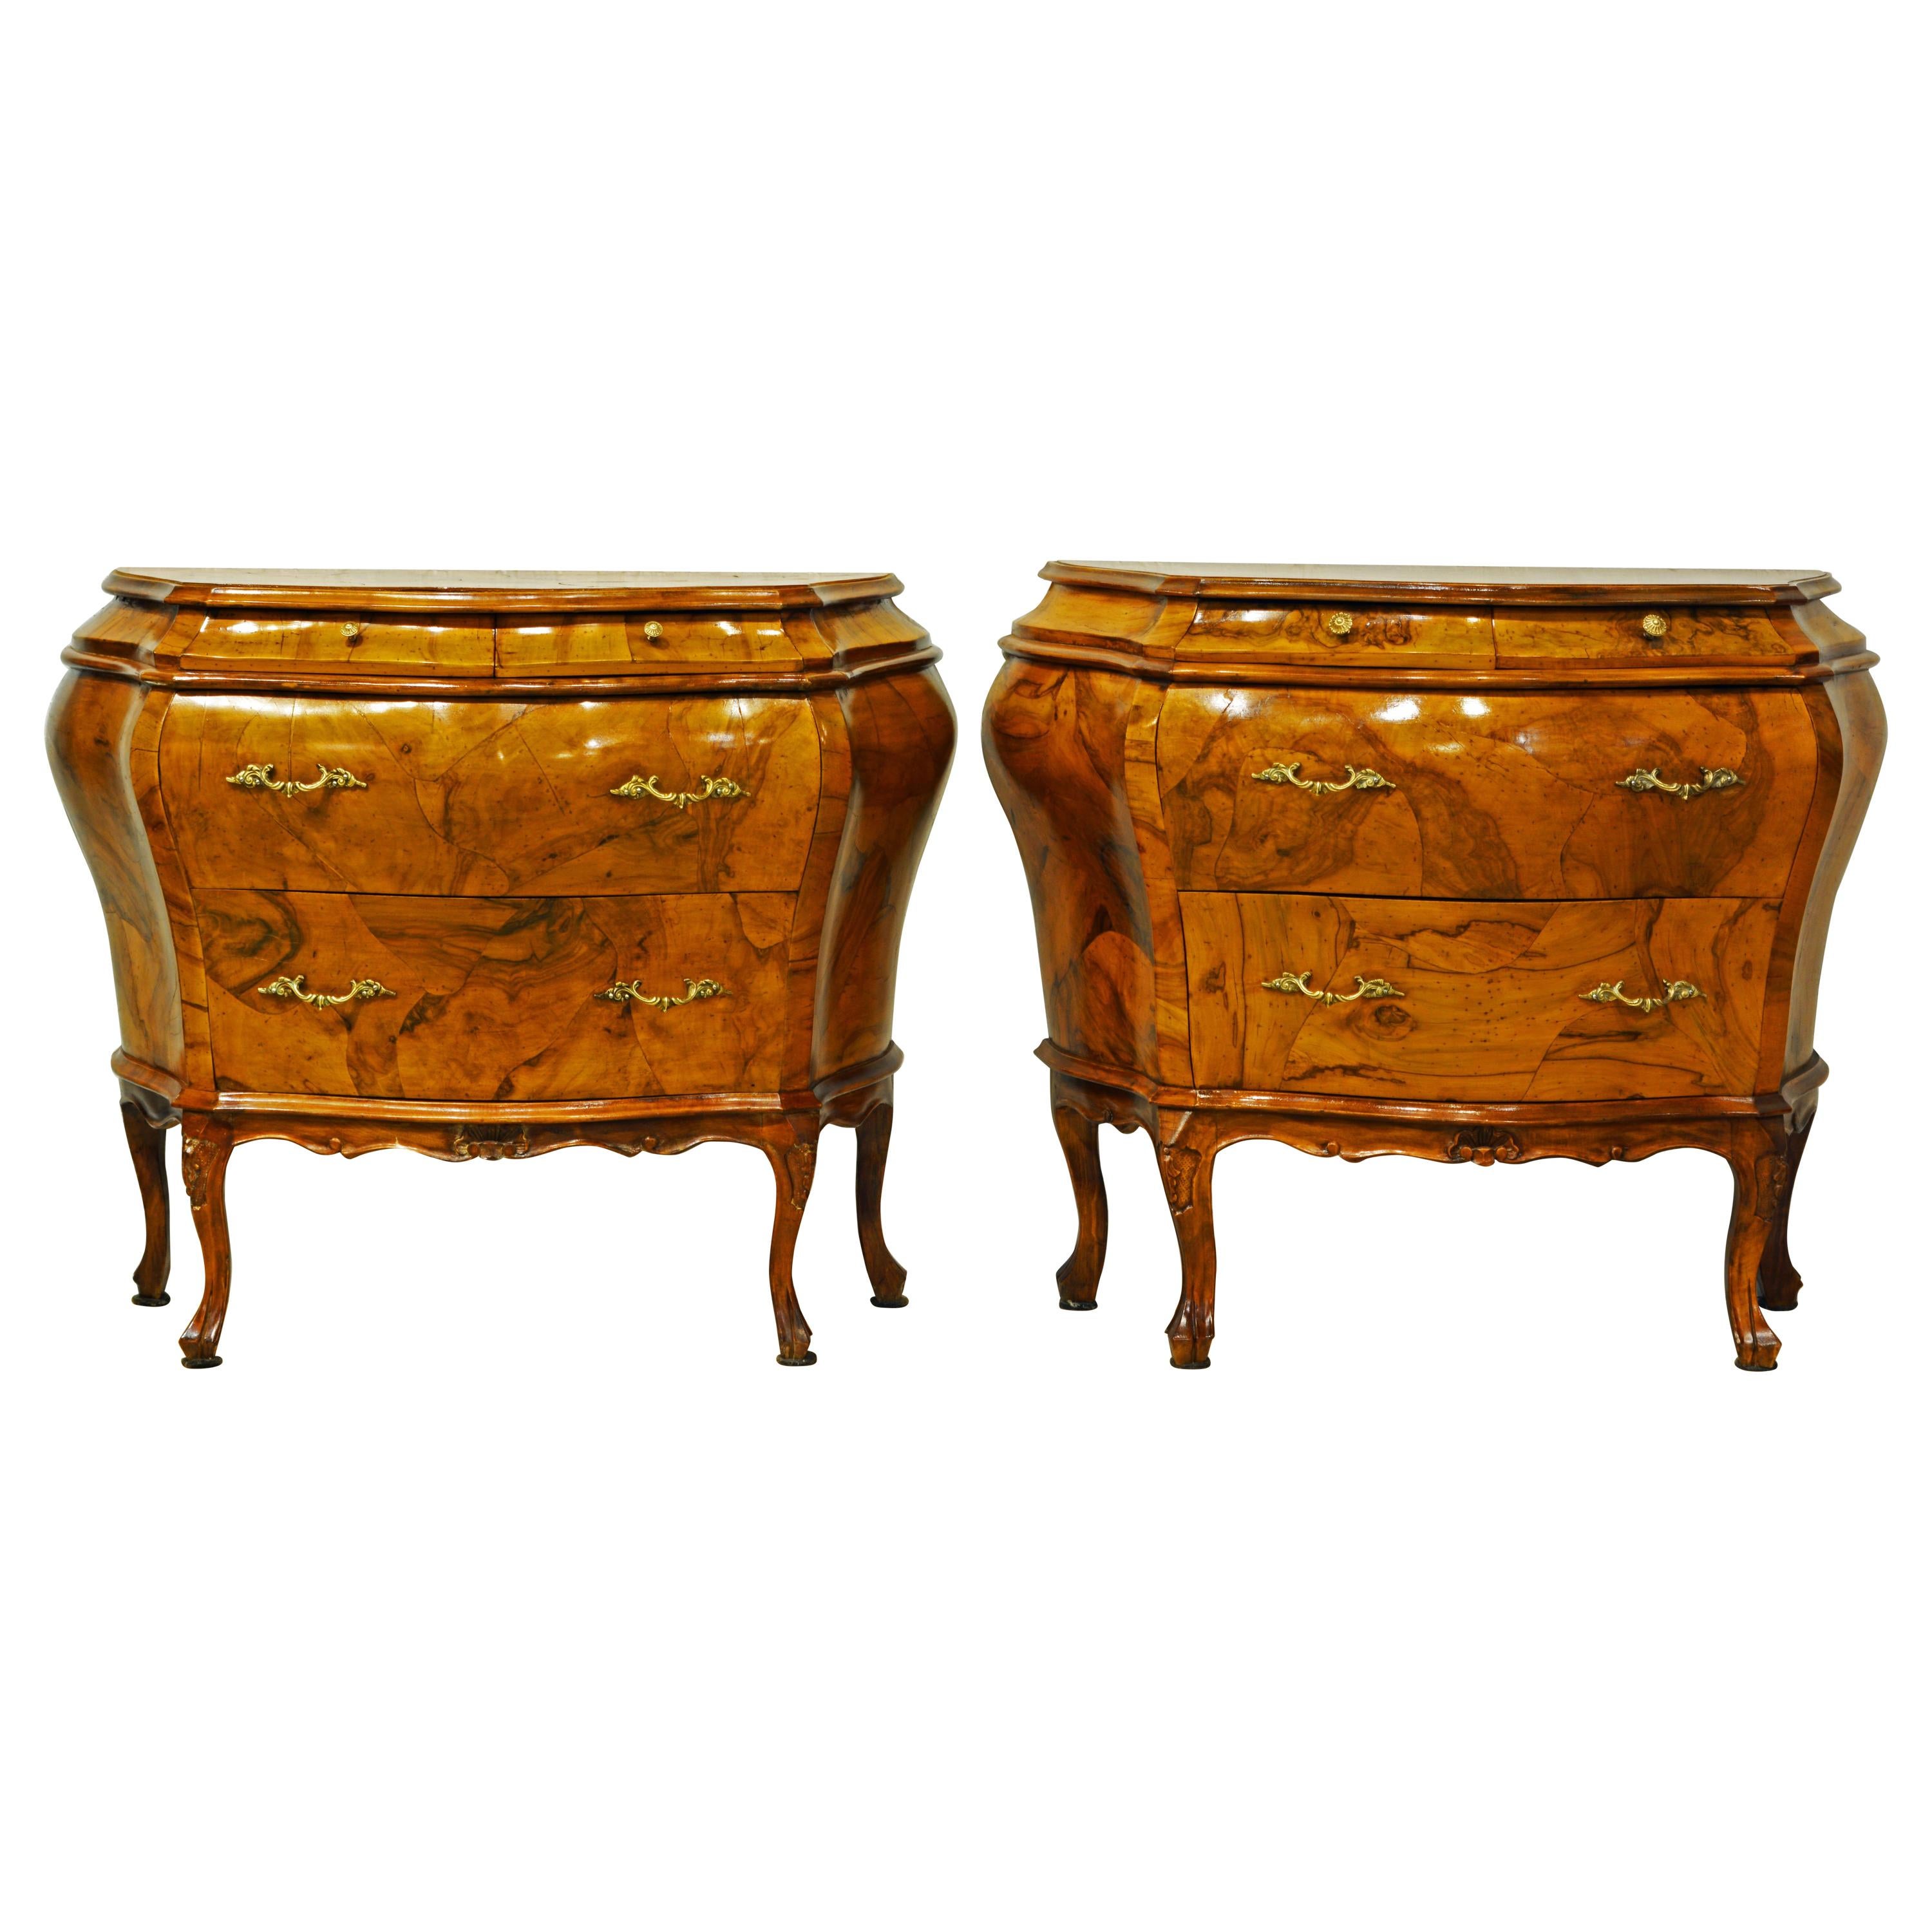 Pair of Charming Italian Rococo Style Carved Olive Wood Bombe Commodes